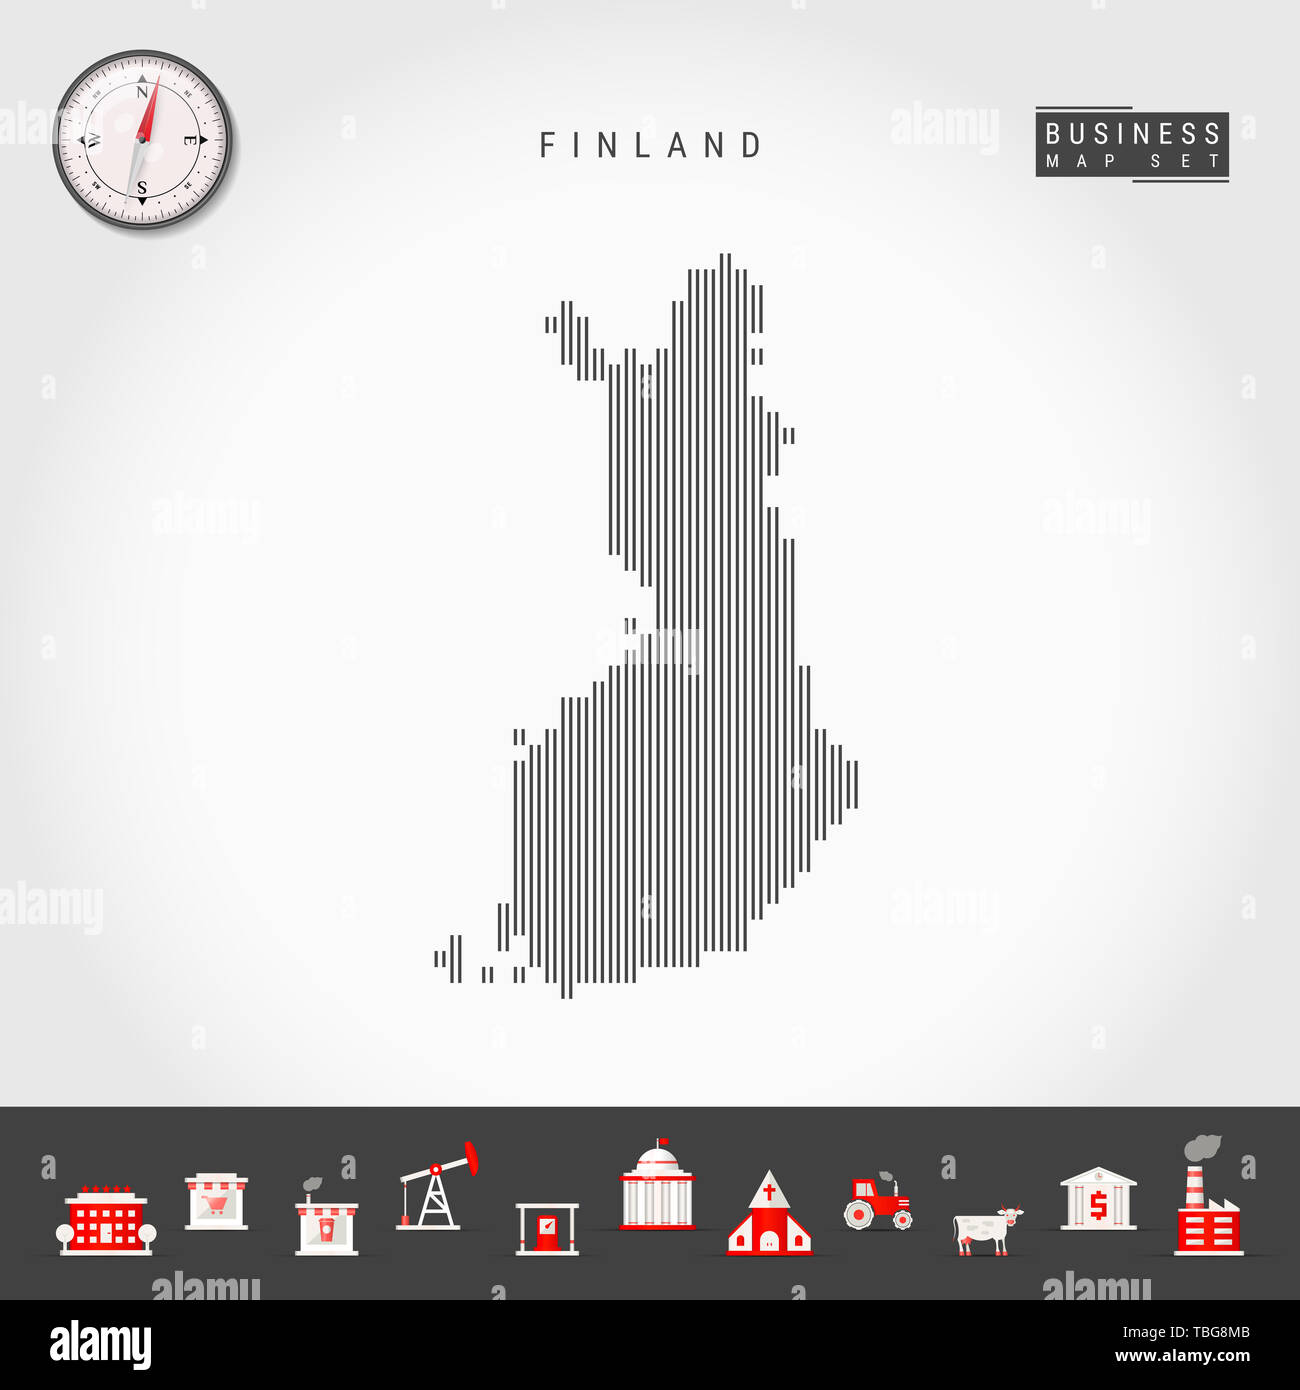 Vertical Lines Pattern Map of Finland. Striped Simple Silhouette of Finland. Realistic Compass. Business Infographic Icons. Stock Photo